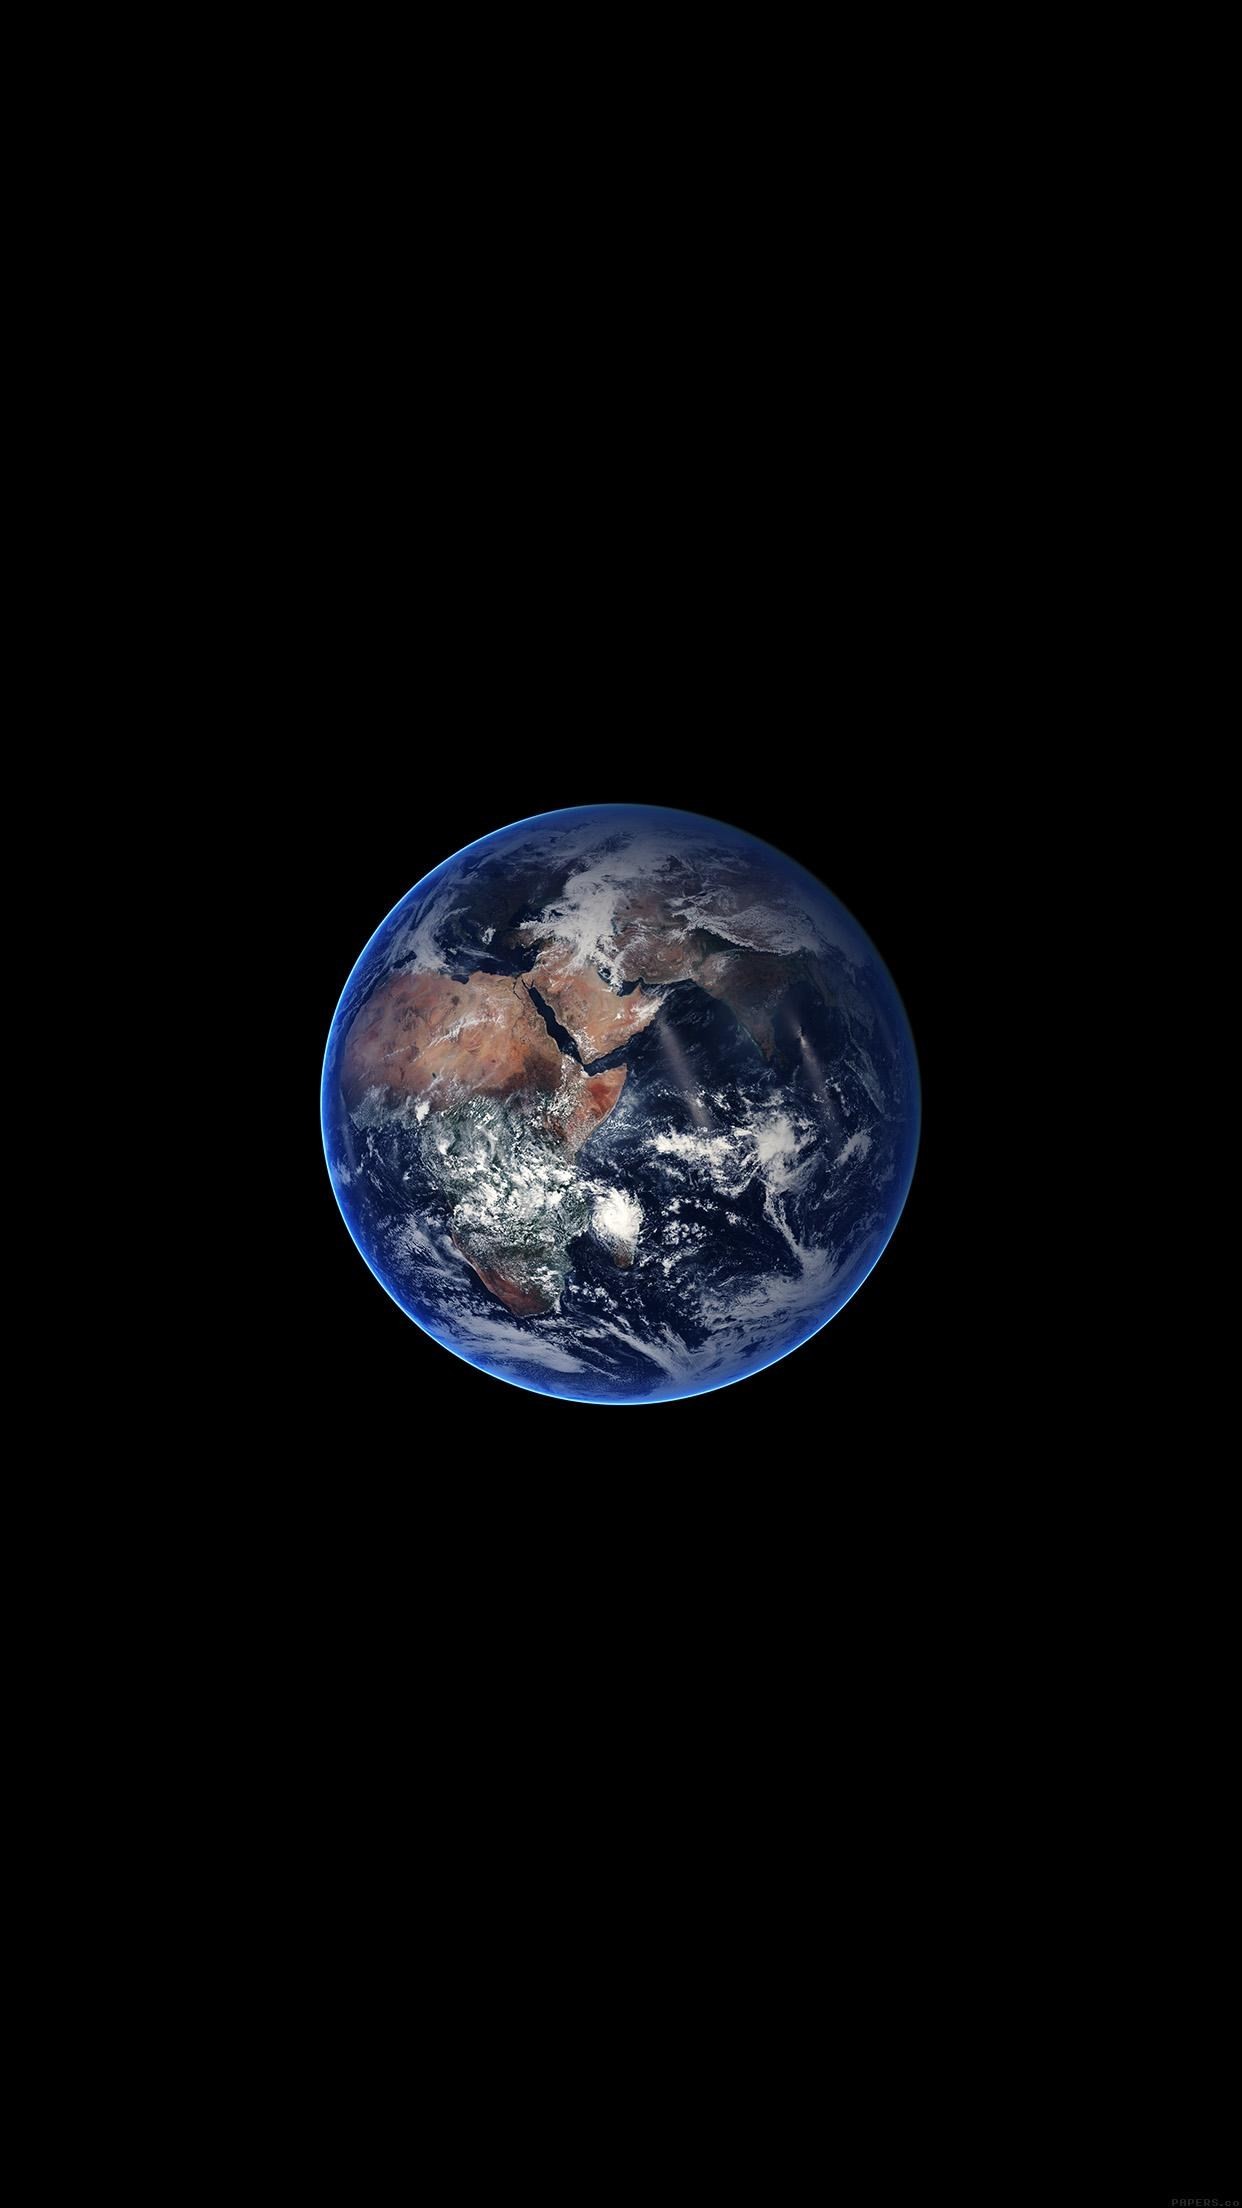 The earth iphone wallpaper